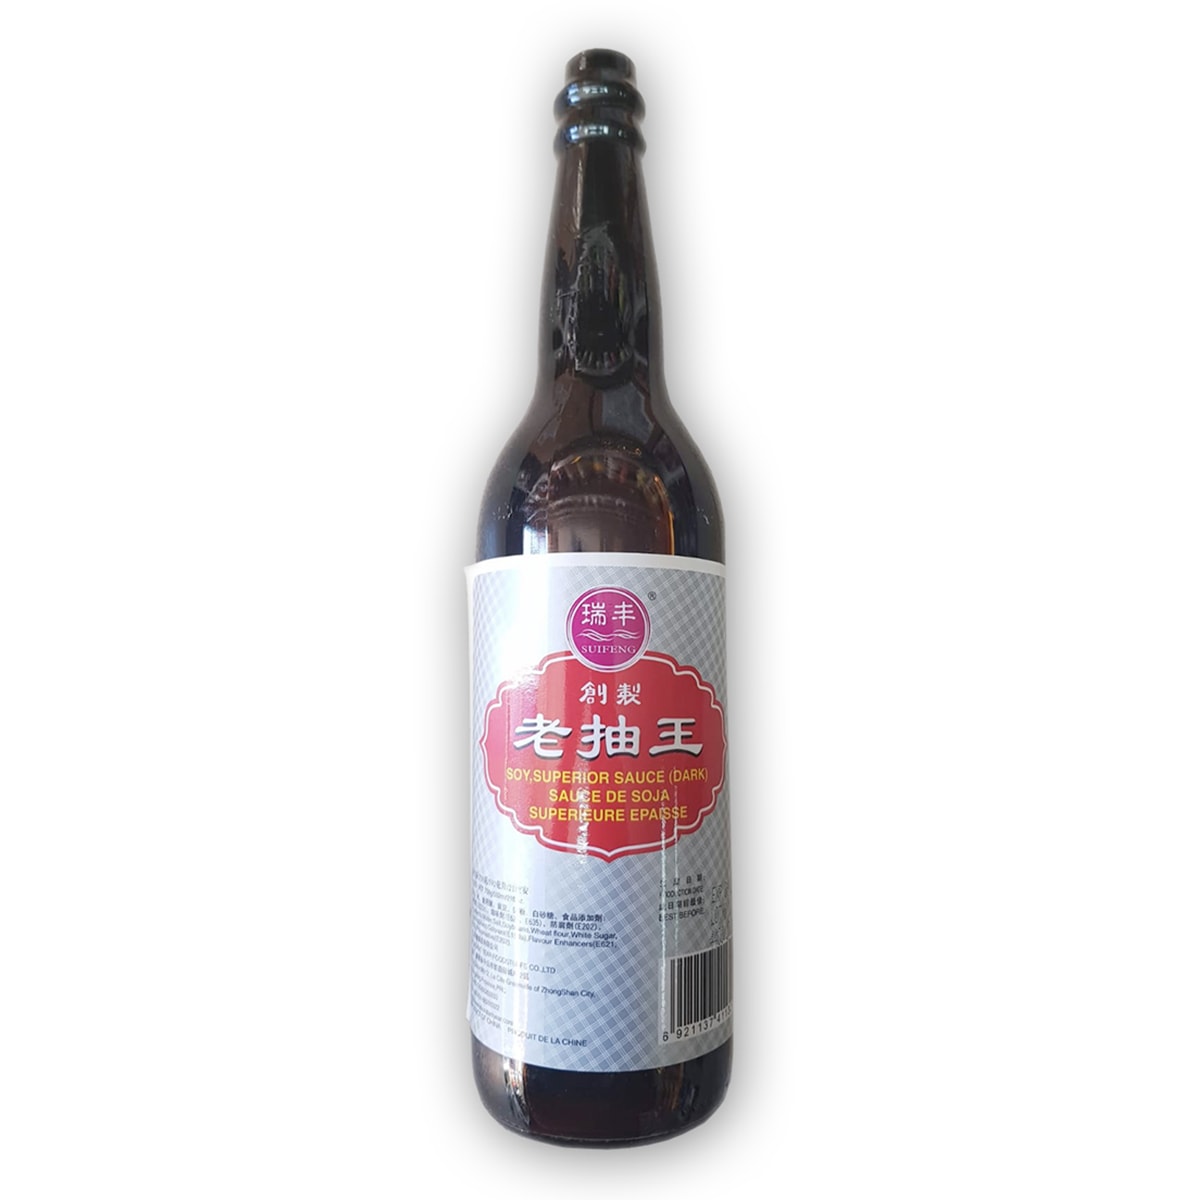 Buy SUI FENG Superior Dark Soy Sauce - 750 ml